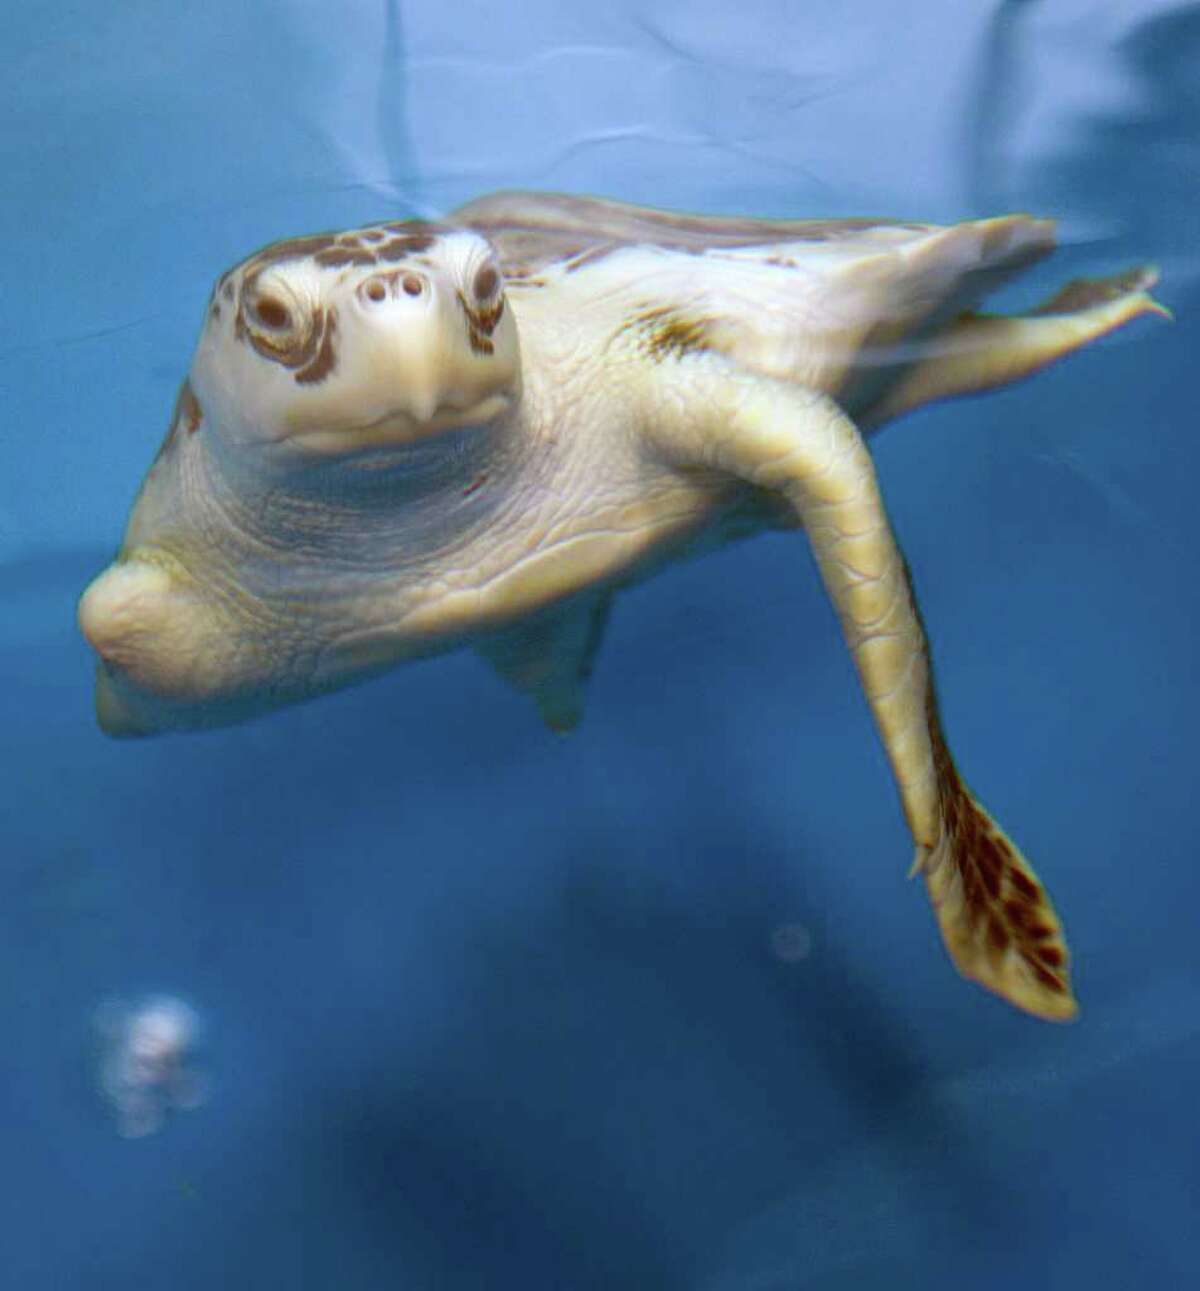 Ancient Sea turtles have been swimming in the oceans for 110 million years, virtually unchanged.